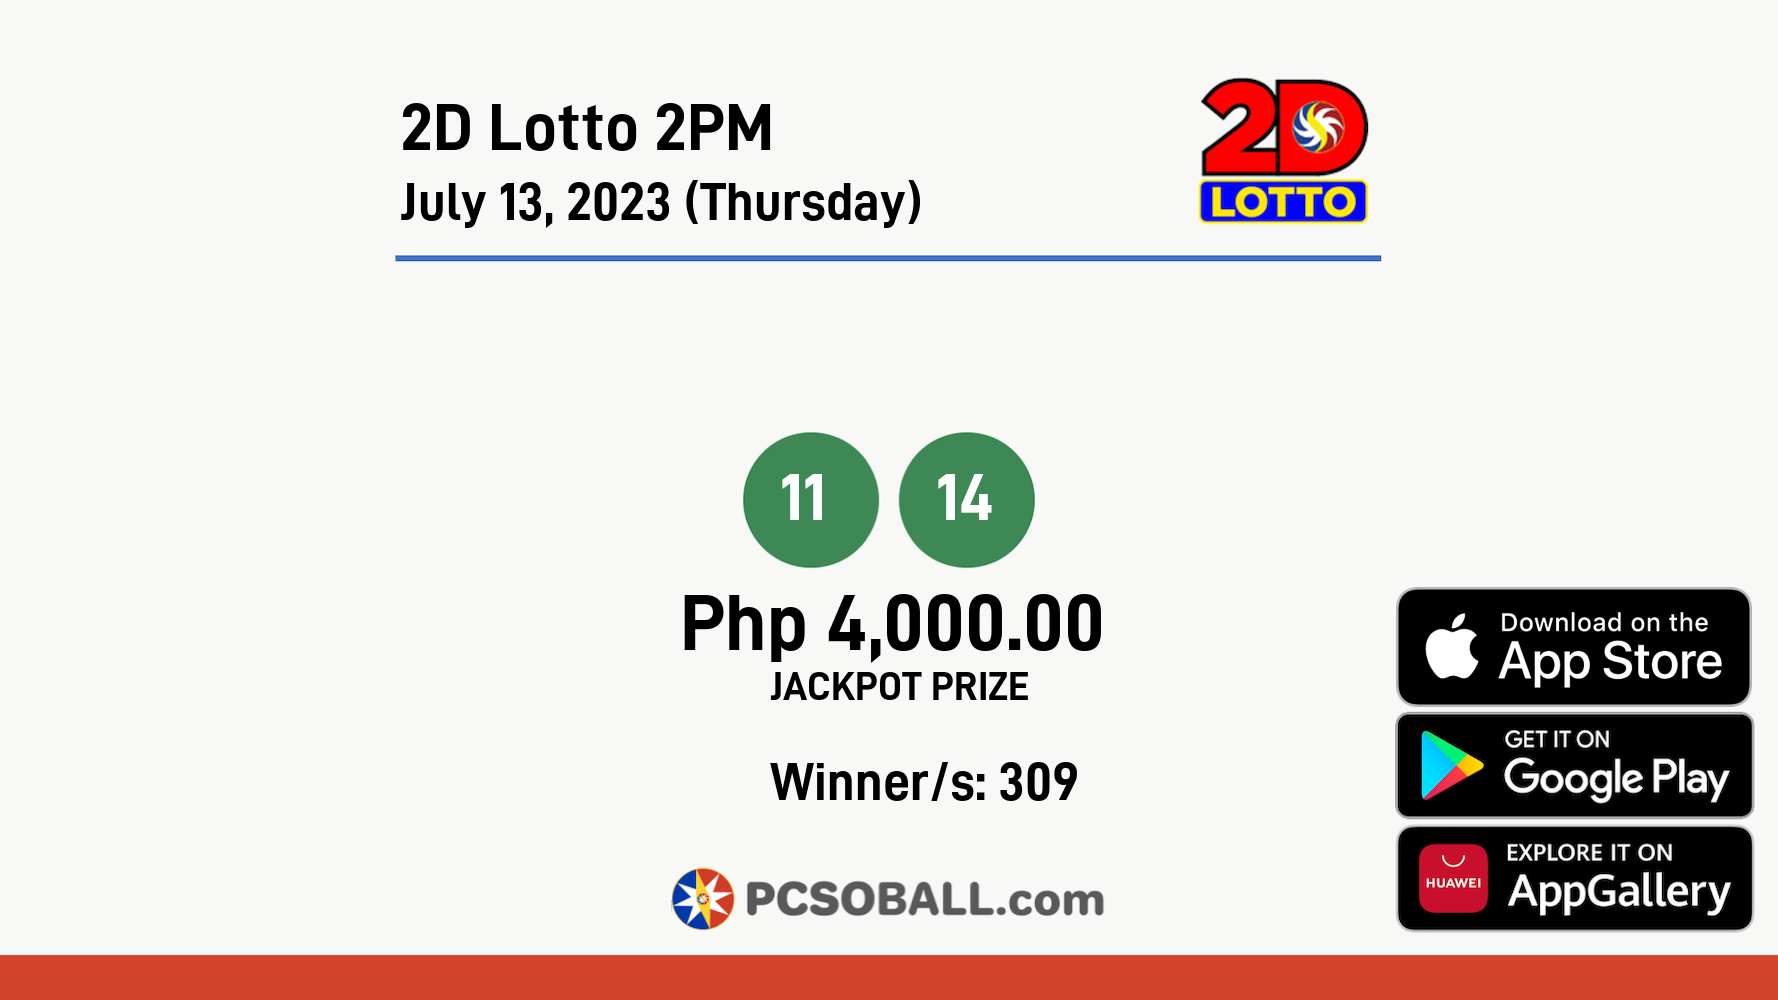 2D Lotto 2PM July 13, 2023 (Thursday) Result